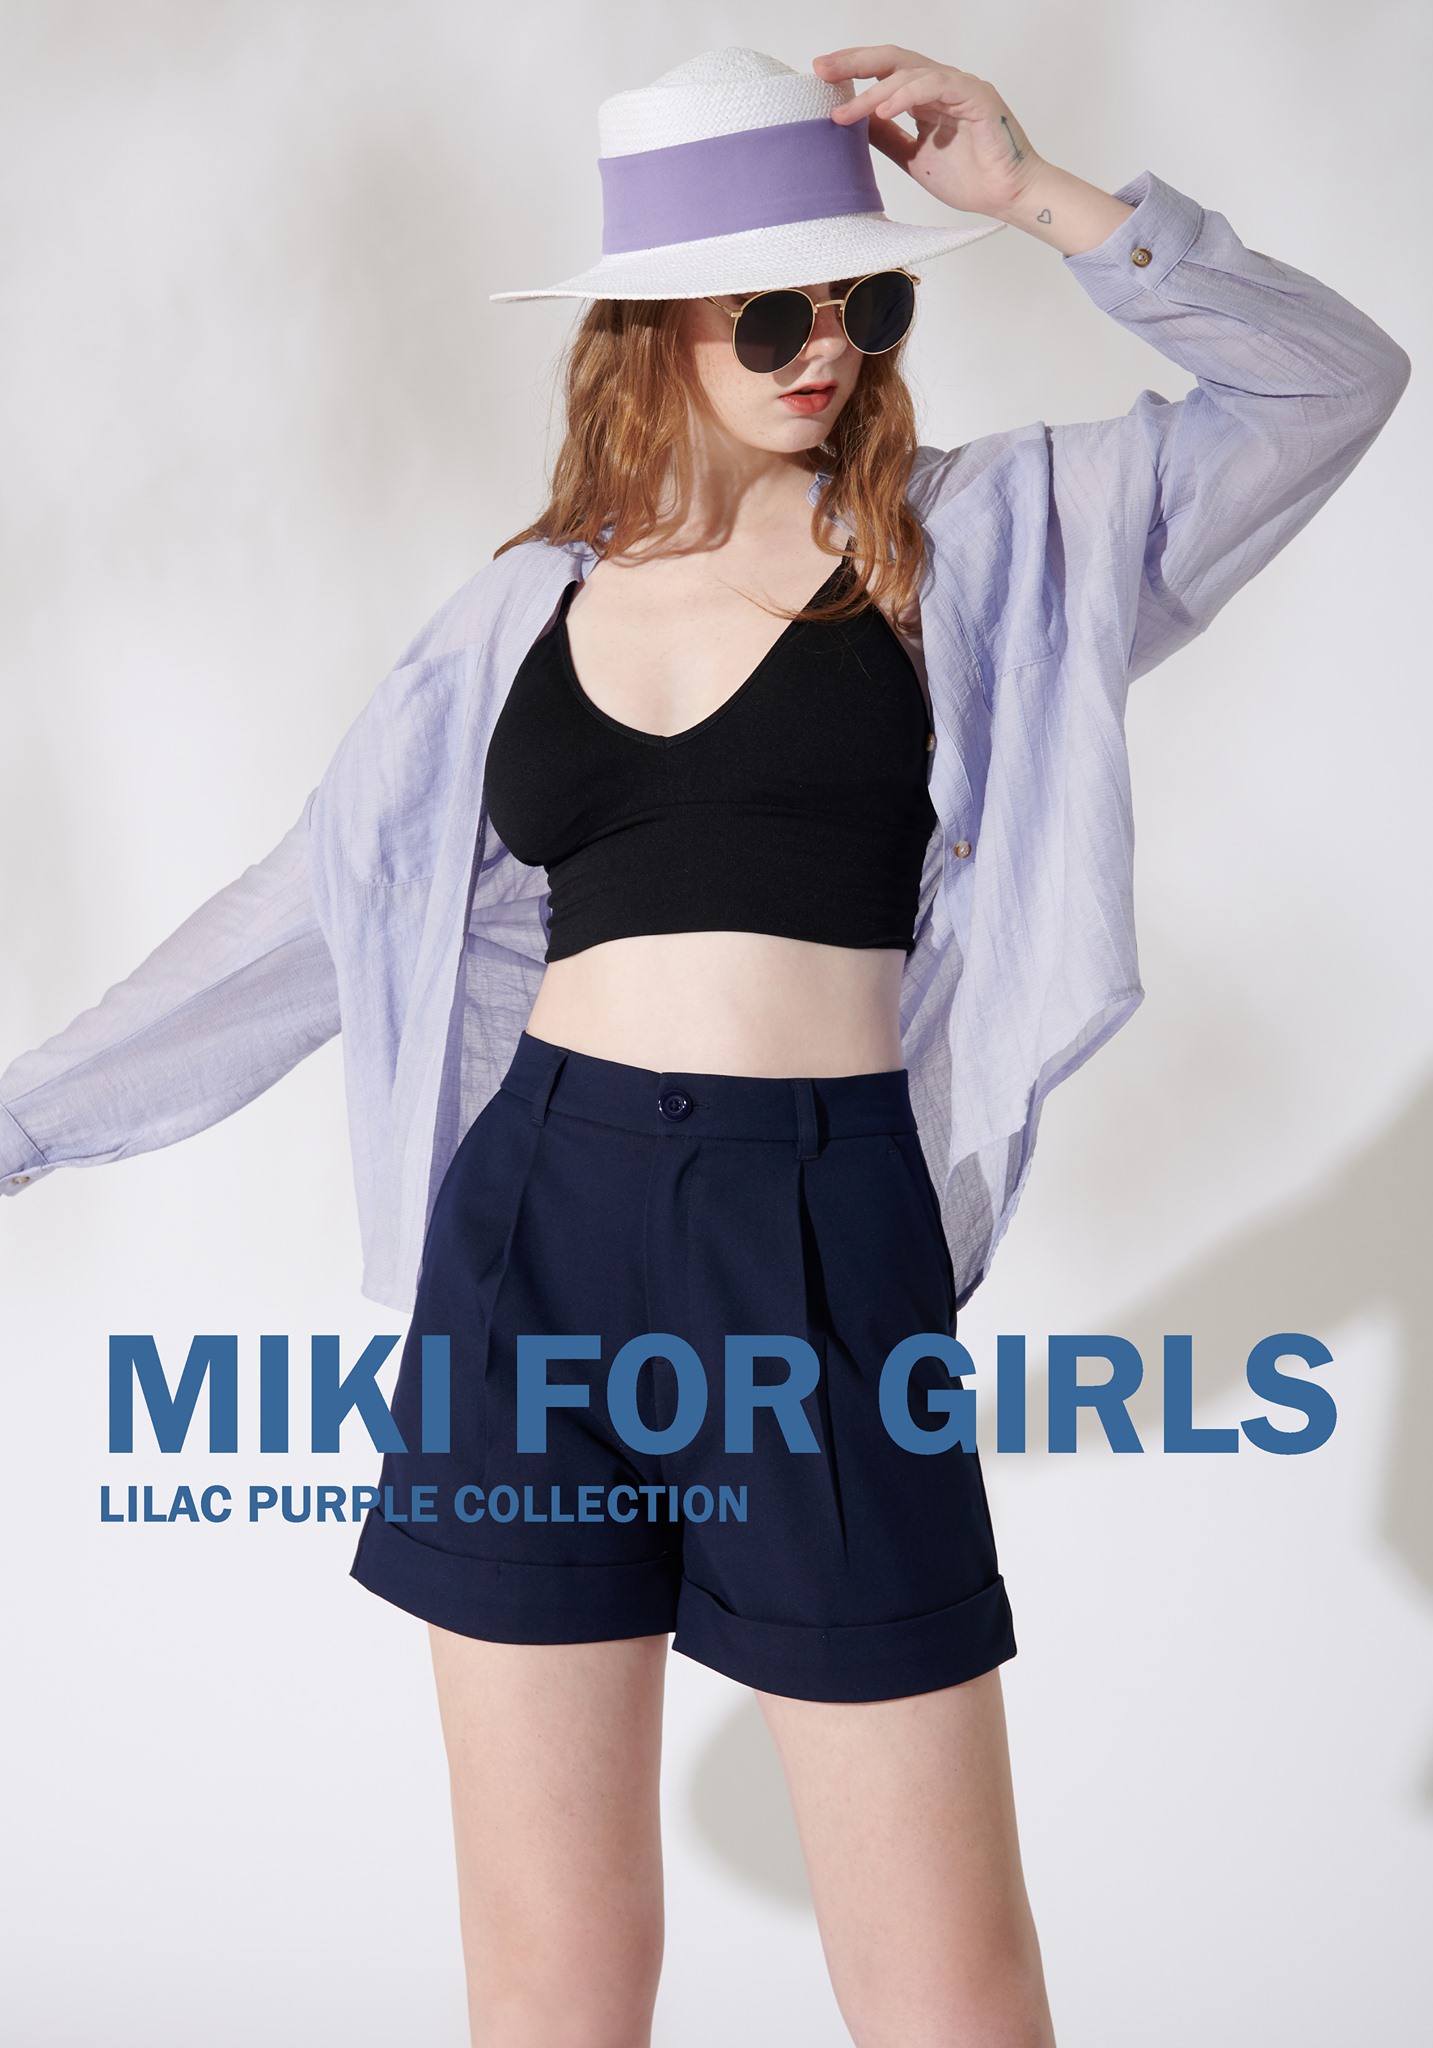 MIKI FOR GIRLS – LILAC PURPLE COLLECTION